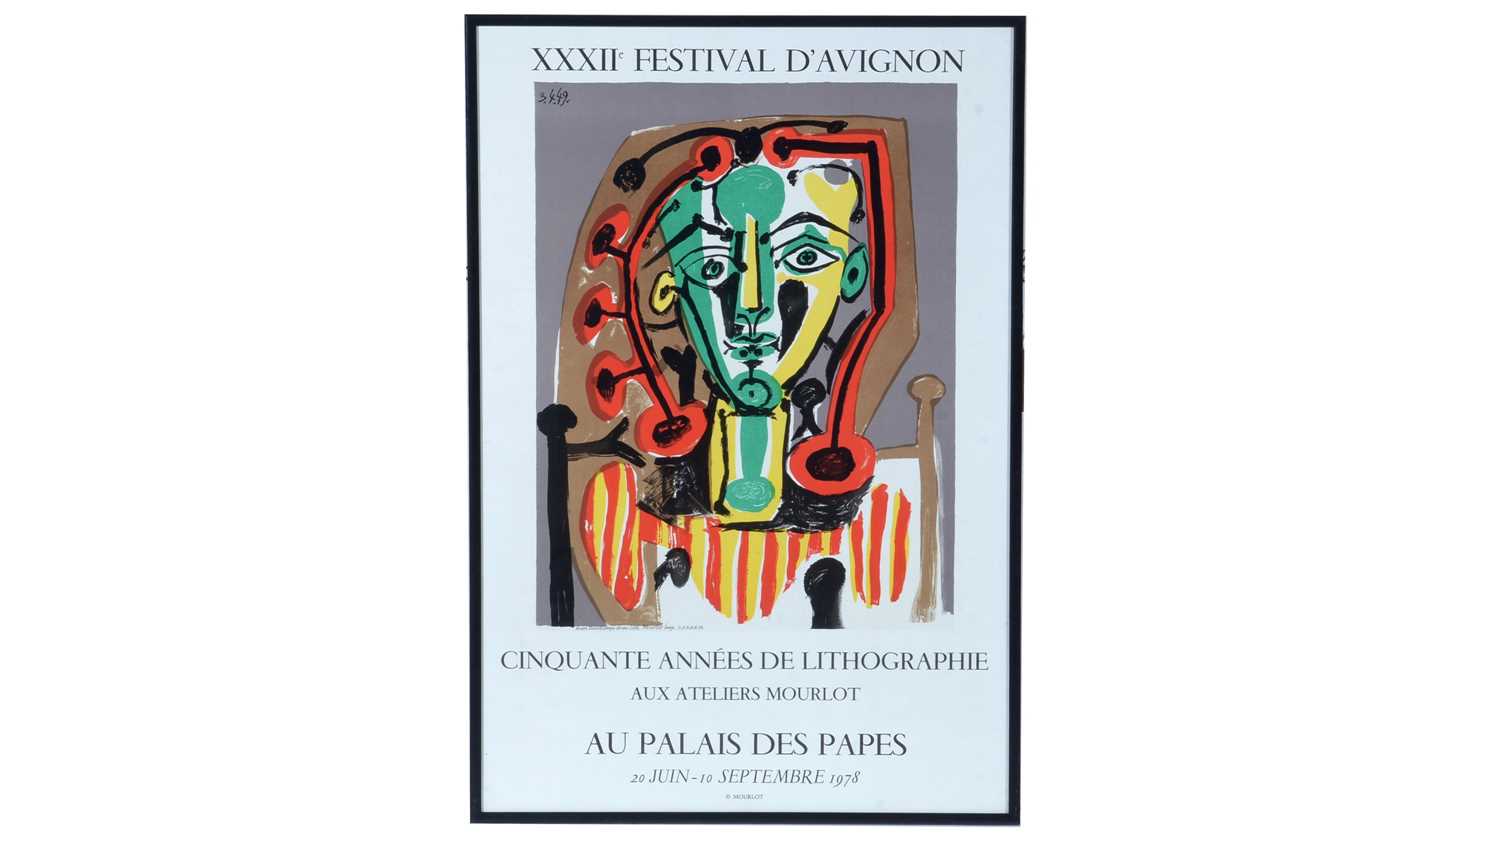 After Pablo Picasso - Exhibition poster for the 32nd Festival D'Avignon | lithograph